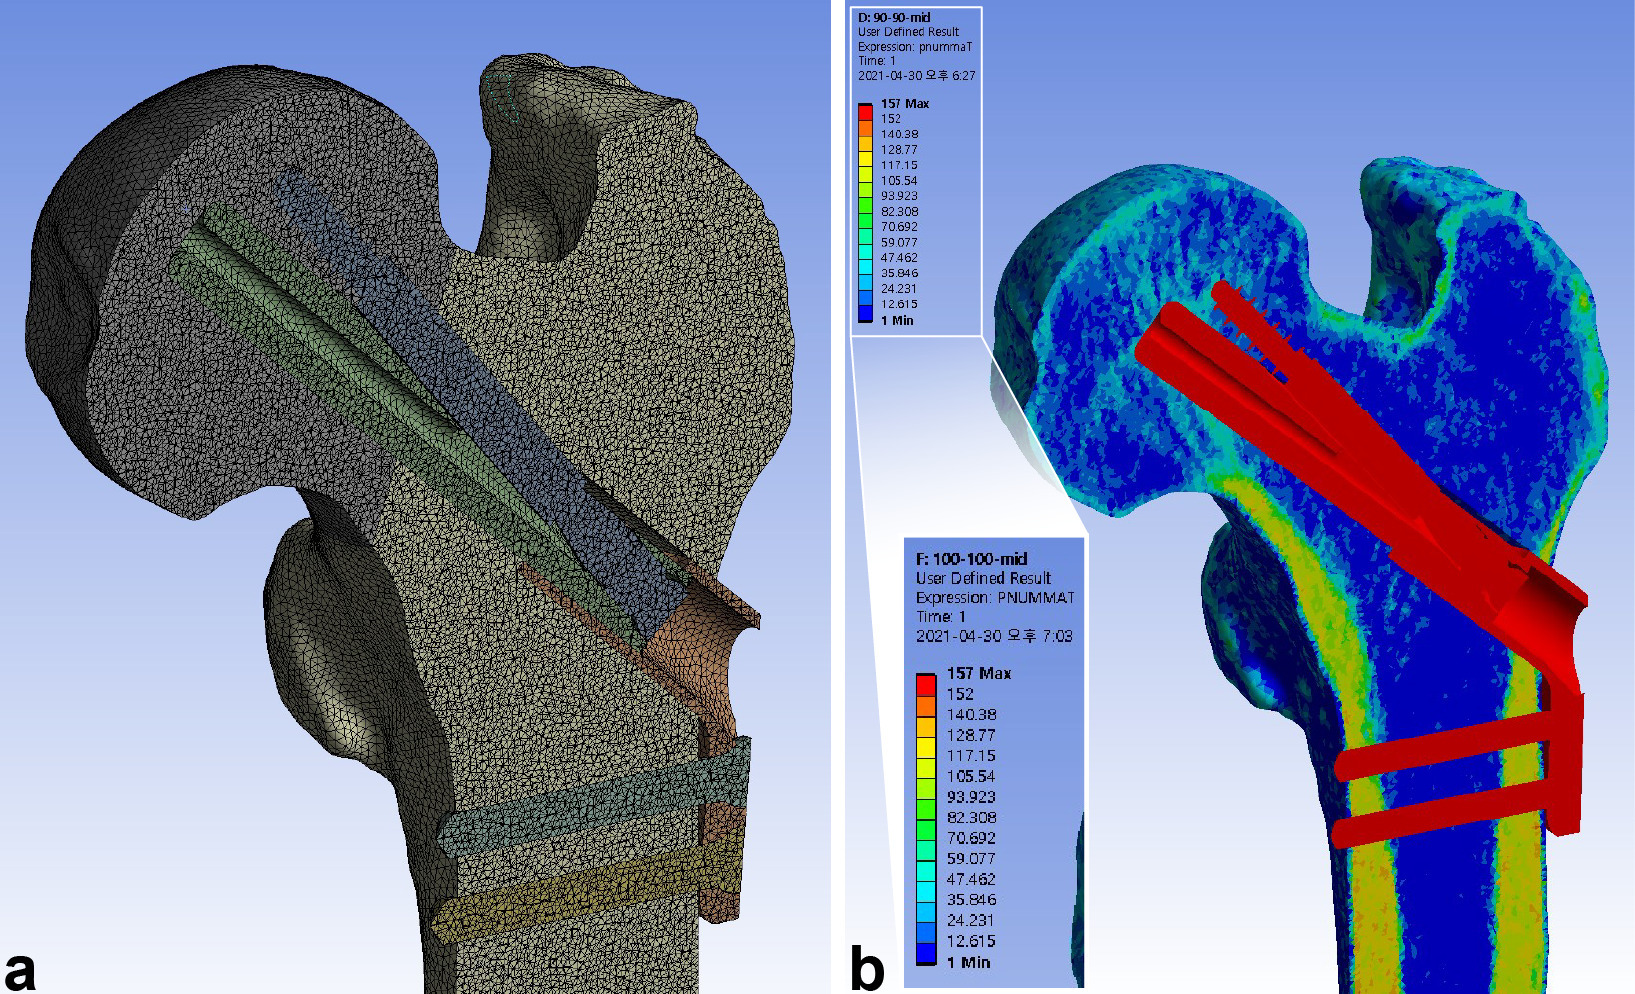 Fig. 2 
            Meshing of the elements and mapping of the material properties were performed after assembling the femur and implant models. a) The models were meshed into tetrahedral elements with a maximum size of 1 mm, achieving a mean of 6,177,864 nodes (6,172,059 to 6,186,454) and 4,487,265 elements (4,483,402 to 4,492,613). b) The material properties of bone were assigned to the elements using the mapping procedure based on the grey values of the CT scan.
          